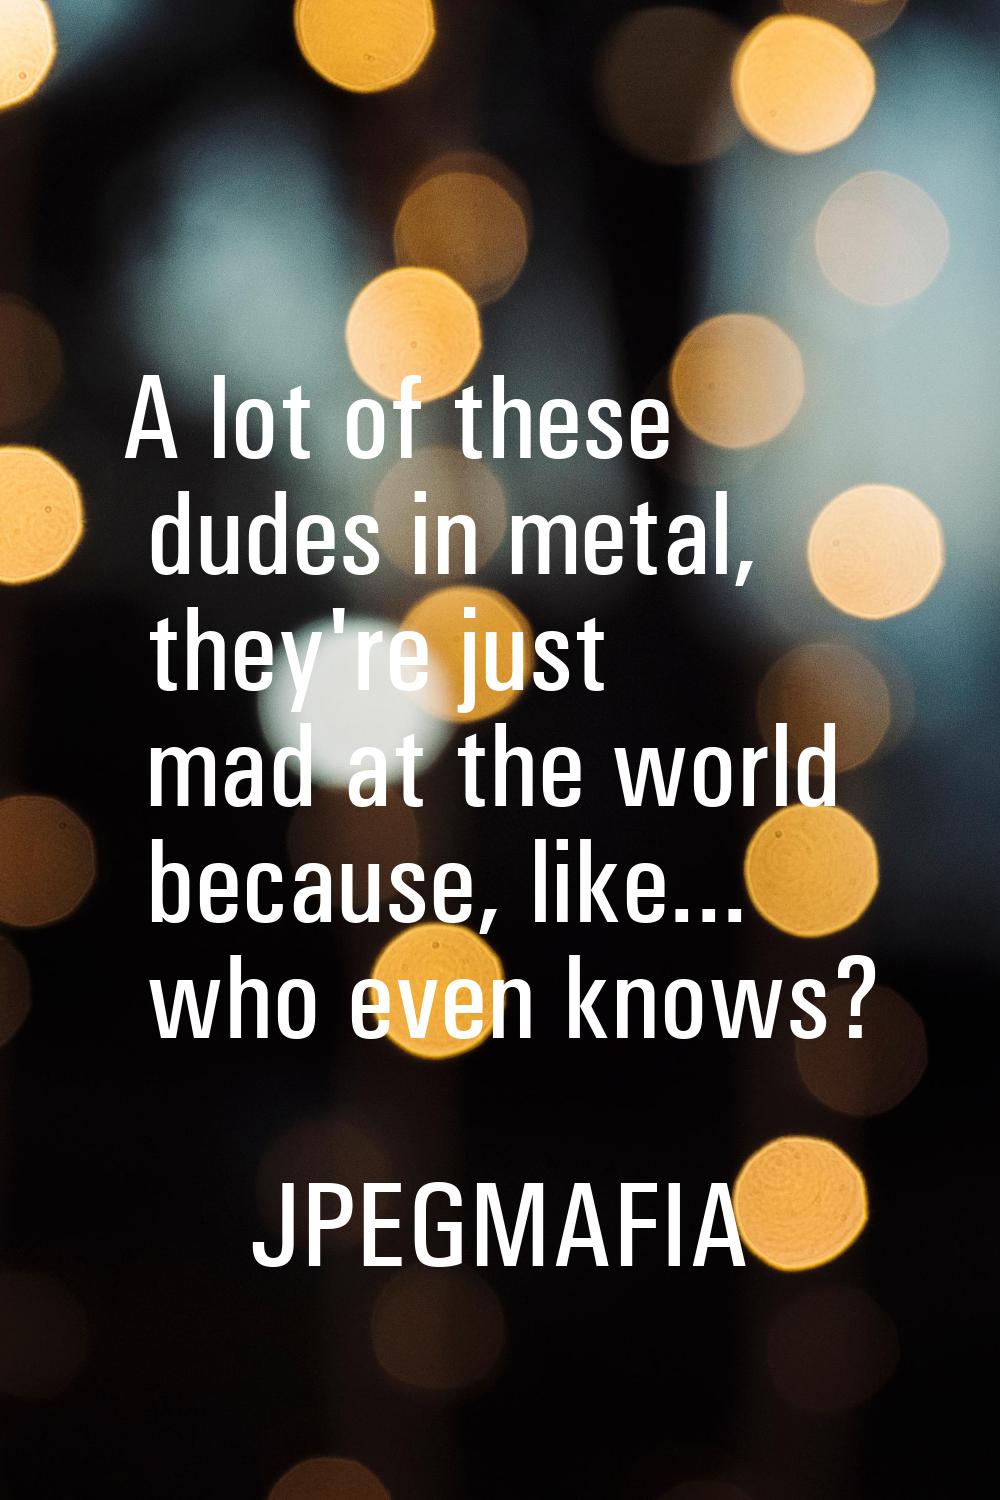 A lot of these dudes in metal, they're just mad at the world because, like... who even knows?